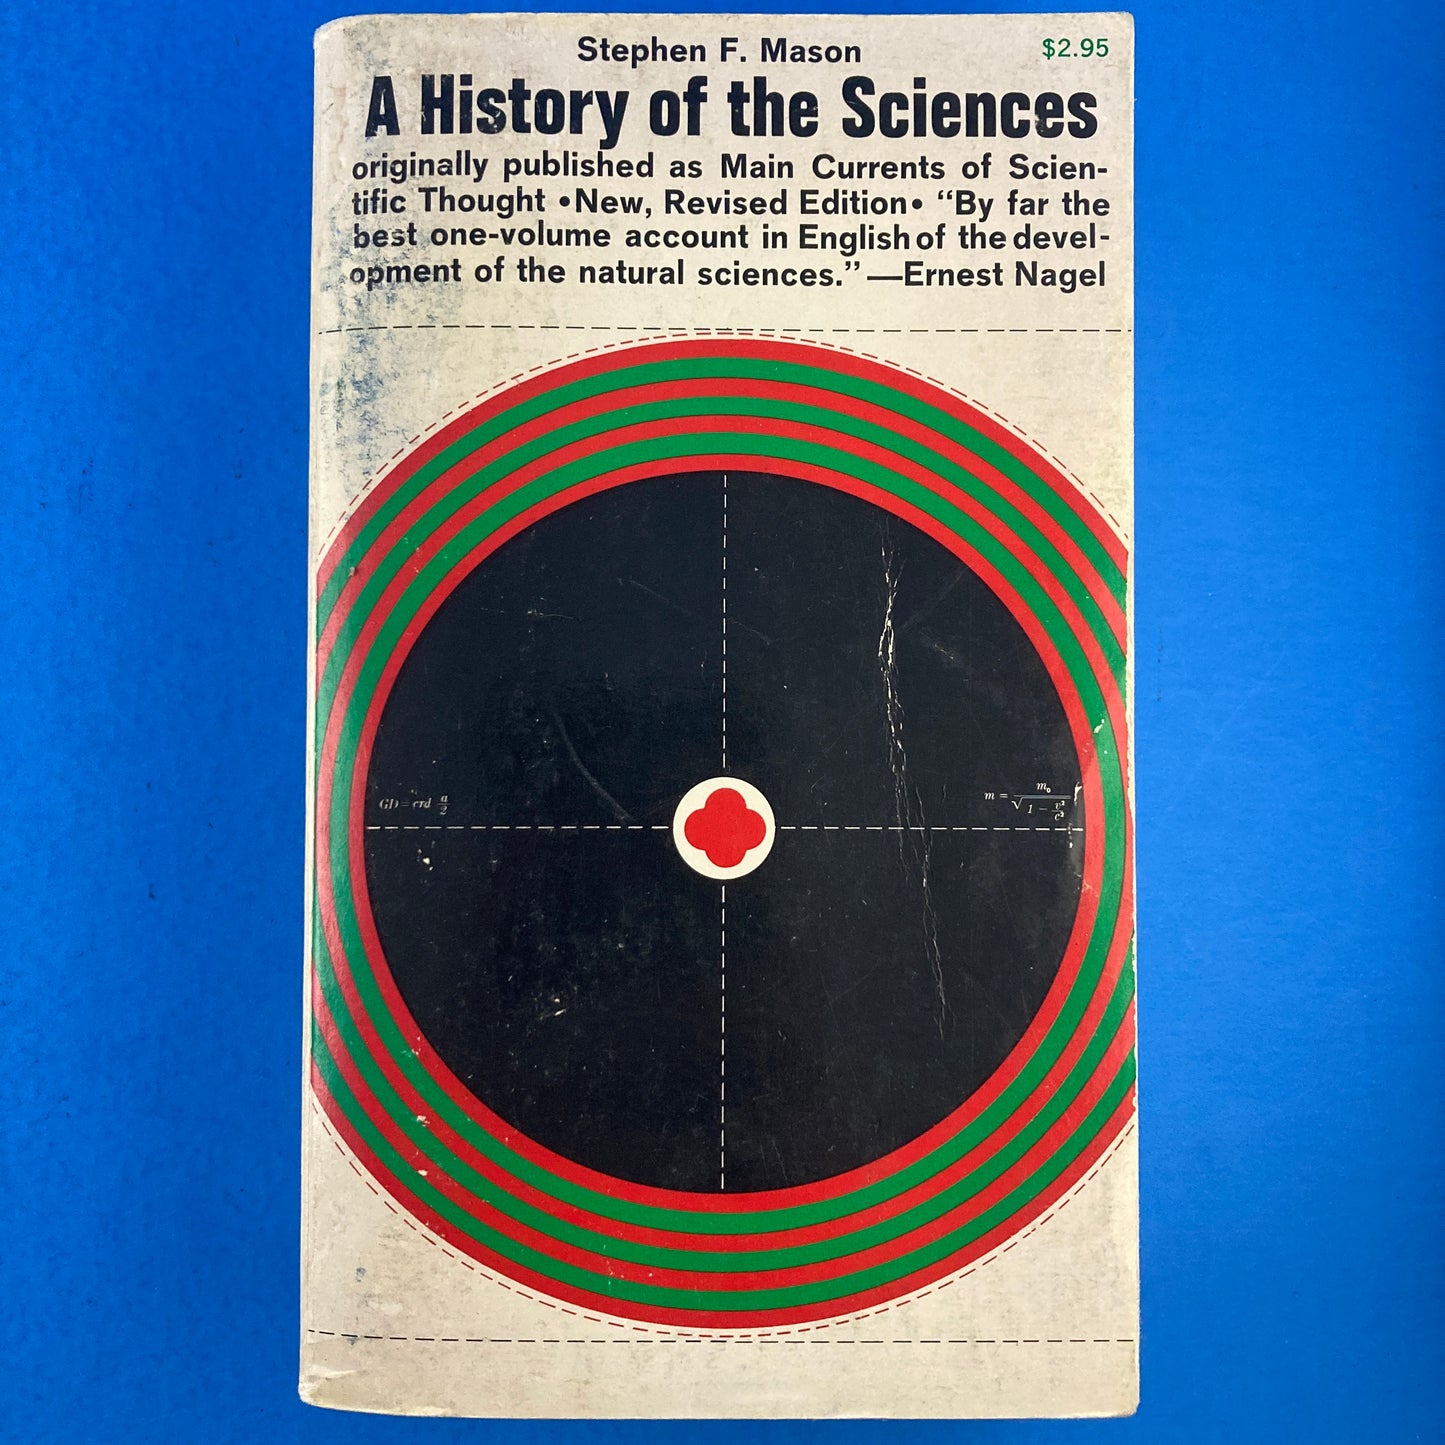 A History of the Sciences